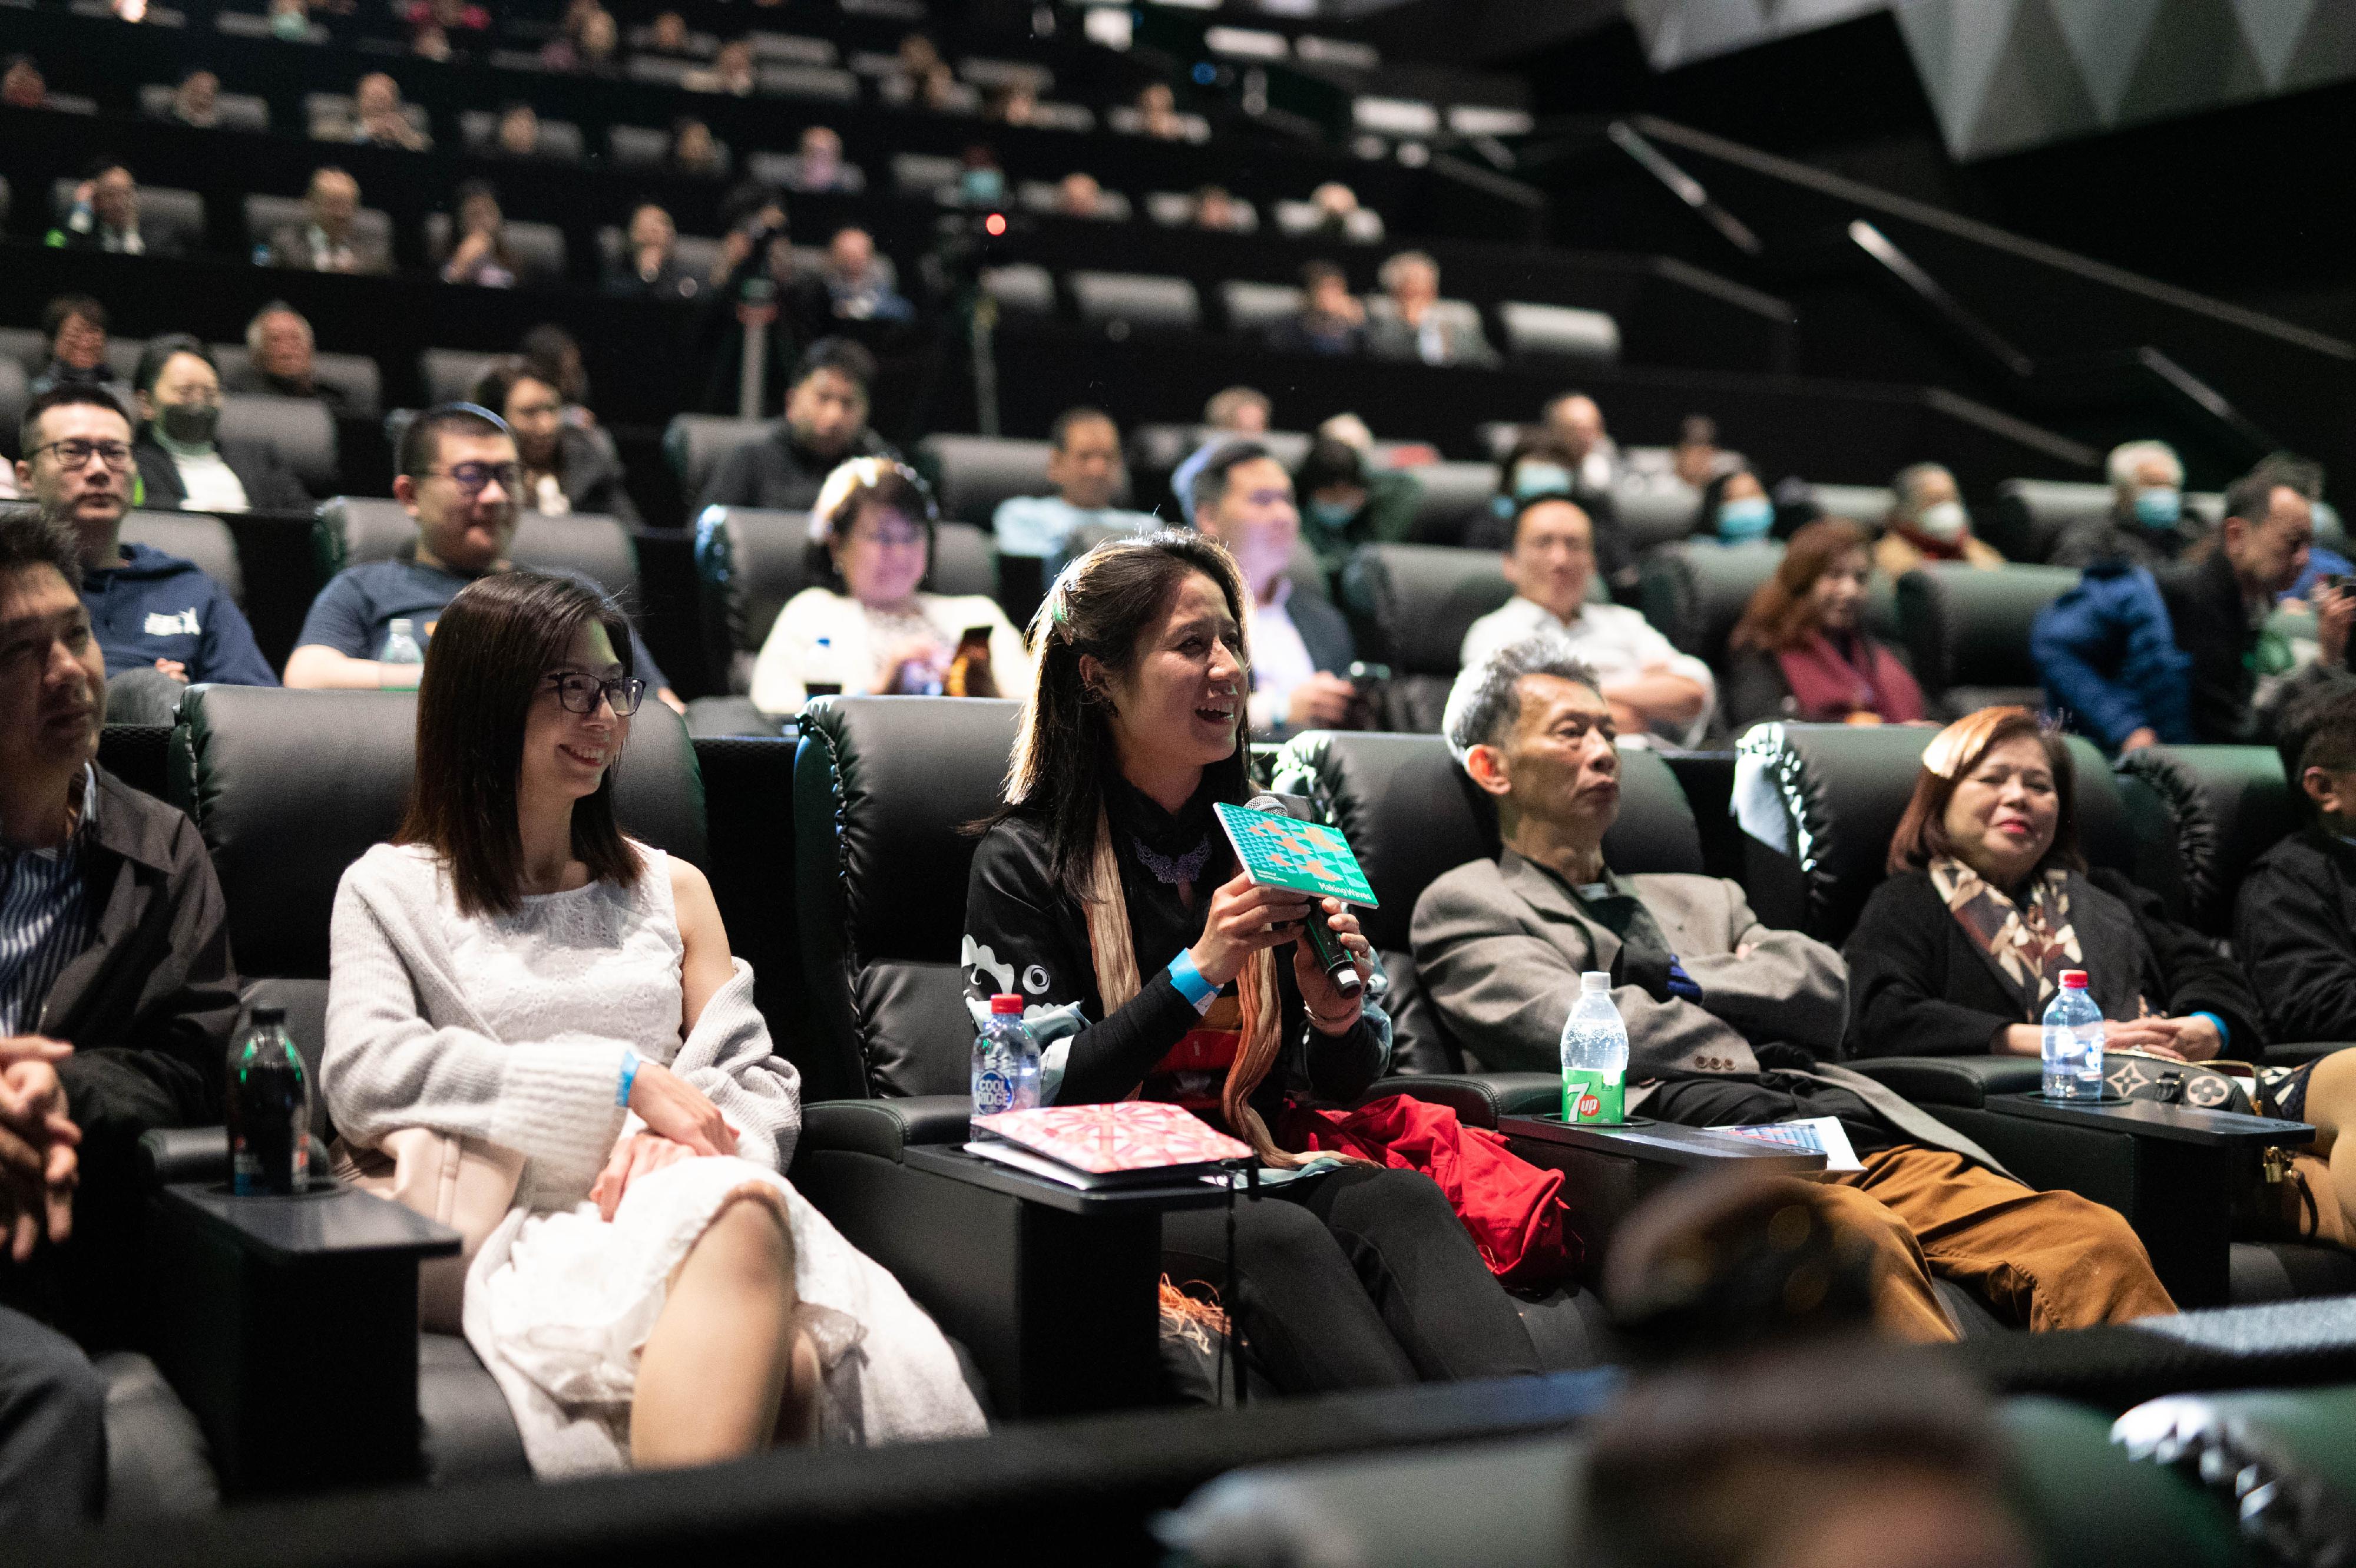 The Hong Kong Economic and Trade Office, Sydney supported the "Making Waves - Navigators of Hong Kong Cinema" to celebrate the 25th anniversary of the establishment of the Hong Kong Special Administrative Region. Photo shows Director Sunny Chan and actress Stephy Tang of Table for Six meets with the Sydney audience via a live holo-presence before the start of the screening.